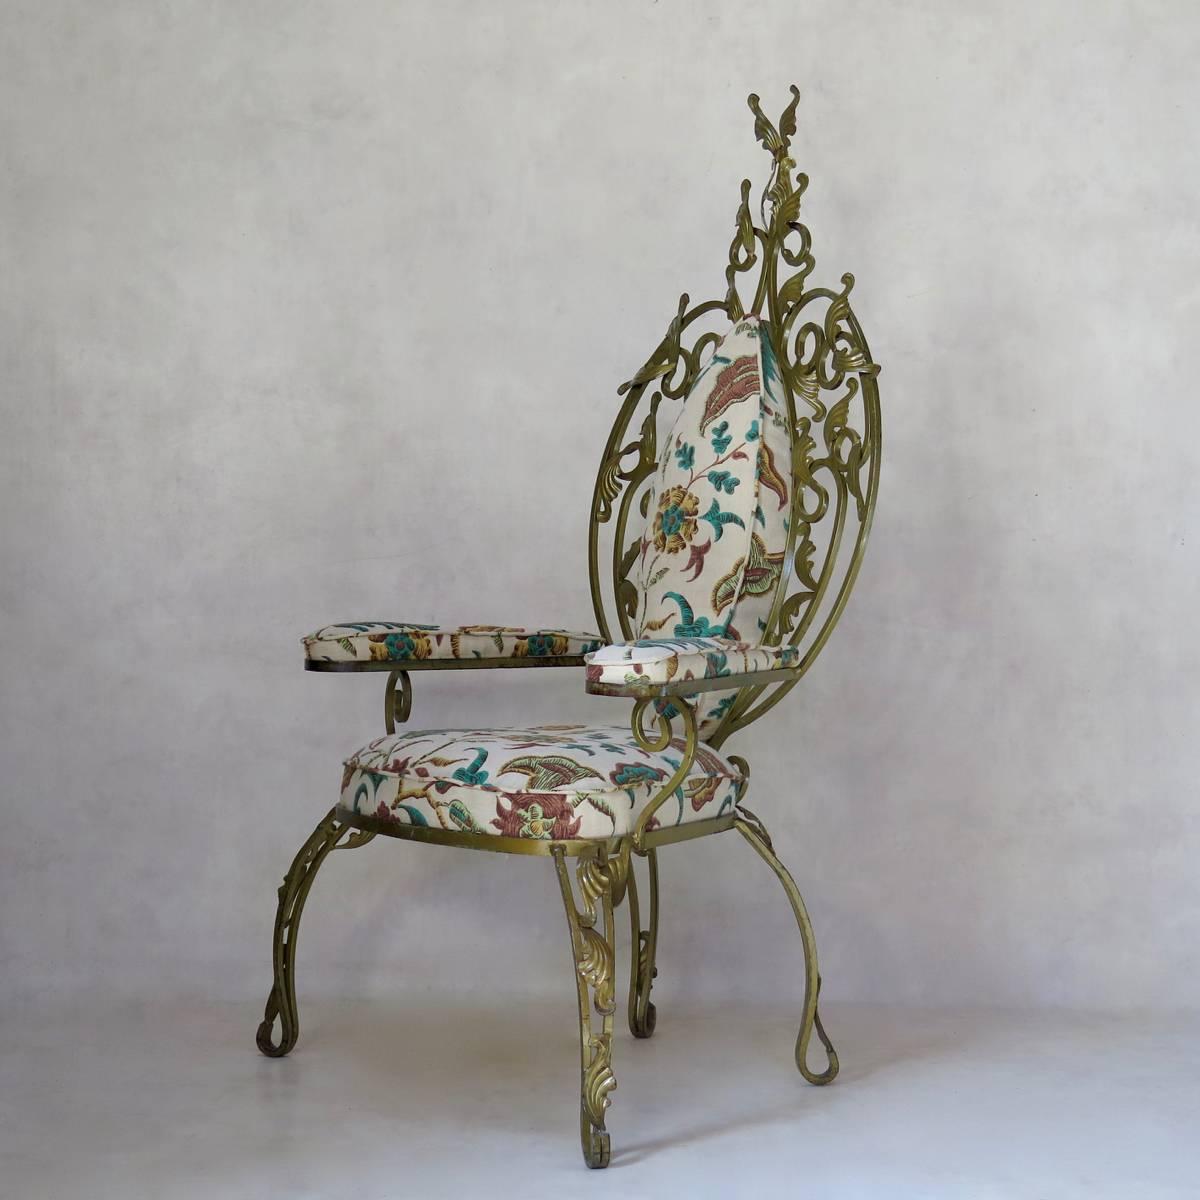 Fabulously over-the-top gilt iron armchair decorated with stylised acanthus leaves. Newly re-upholstered in vintage fabric. In the style of Pier Luigi Colli.